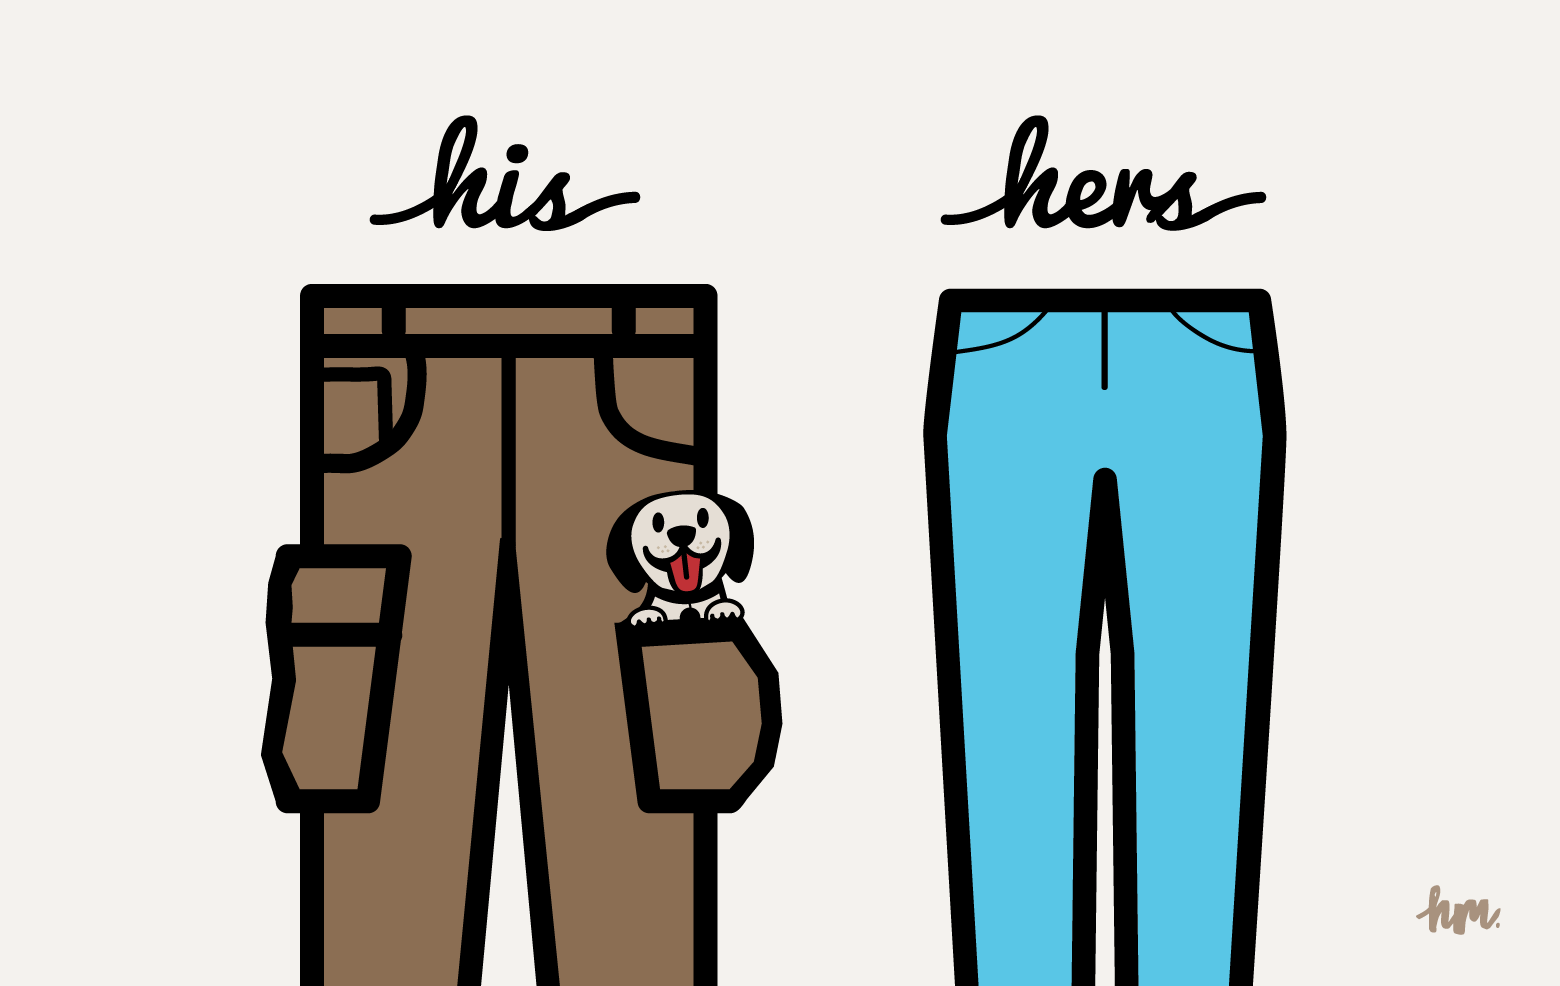 Illustration of his cargo pants with full pockets including a puppy in one pocket and her pants with two tiny pockets.